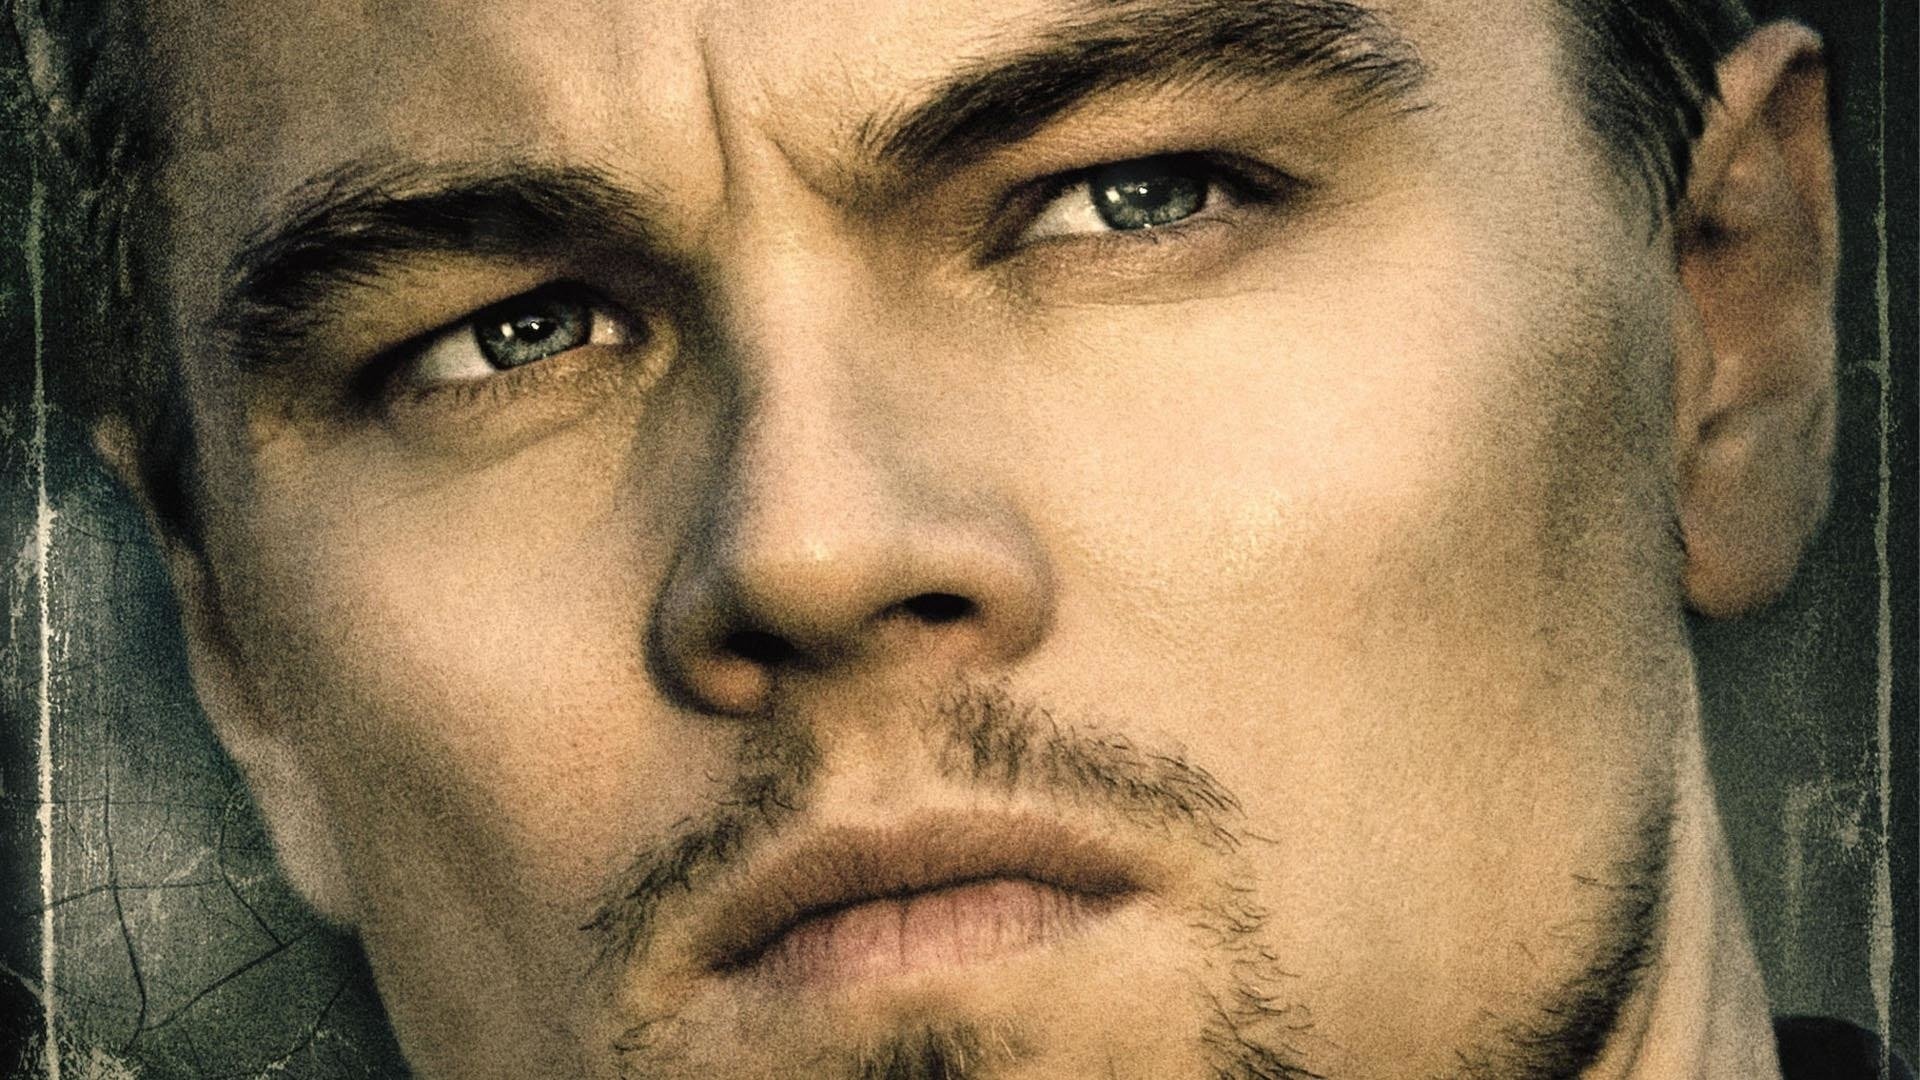 The Departed, High-definition wallpapers, Striking backgrounds, Stunning visuals, 1920x1080 Full HD Desktop